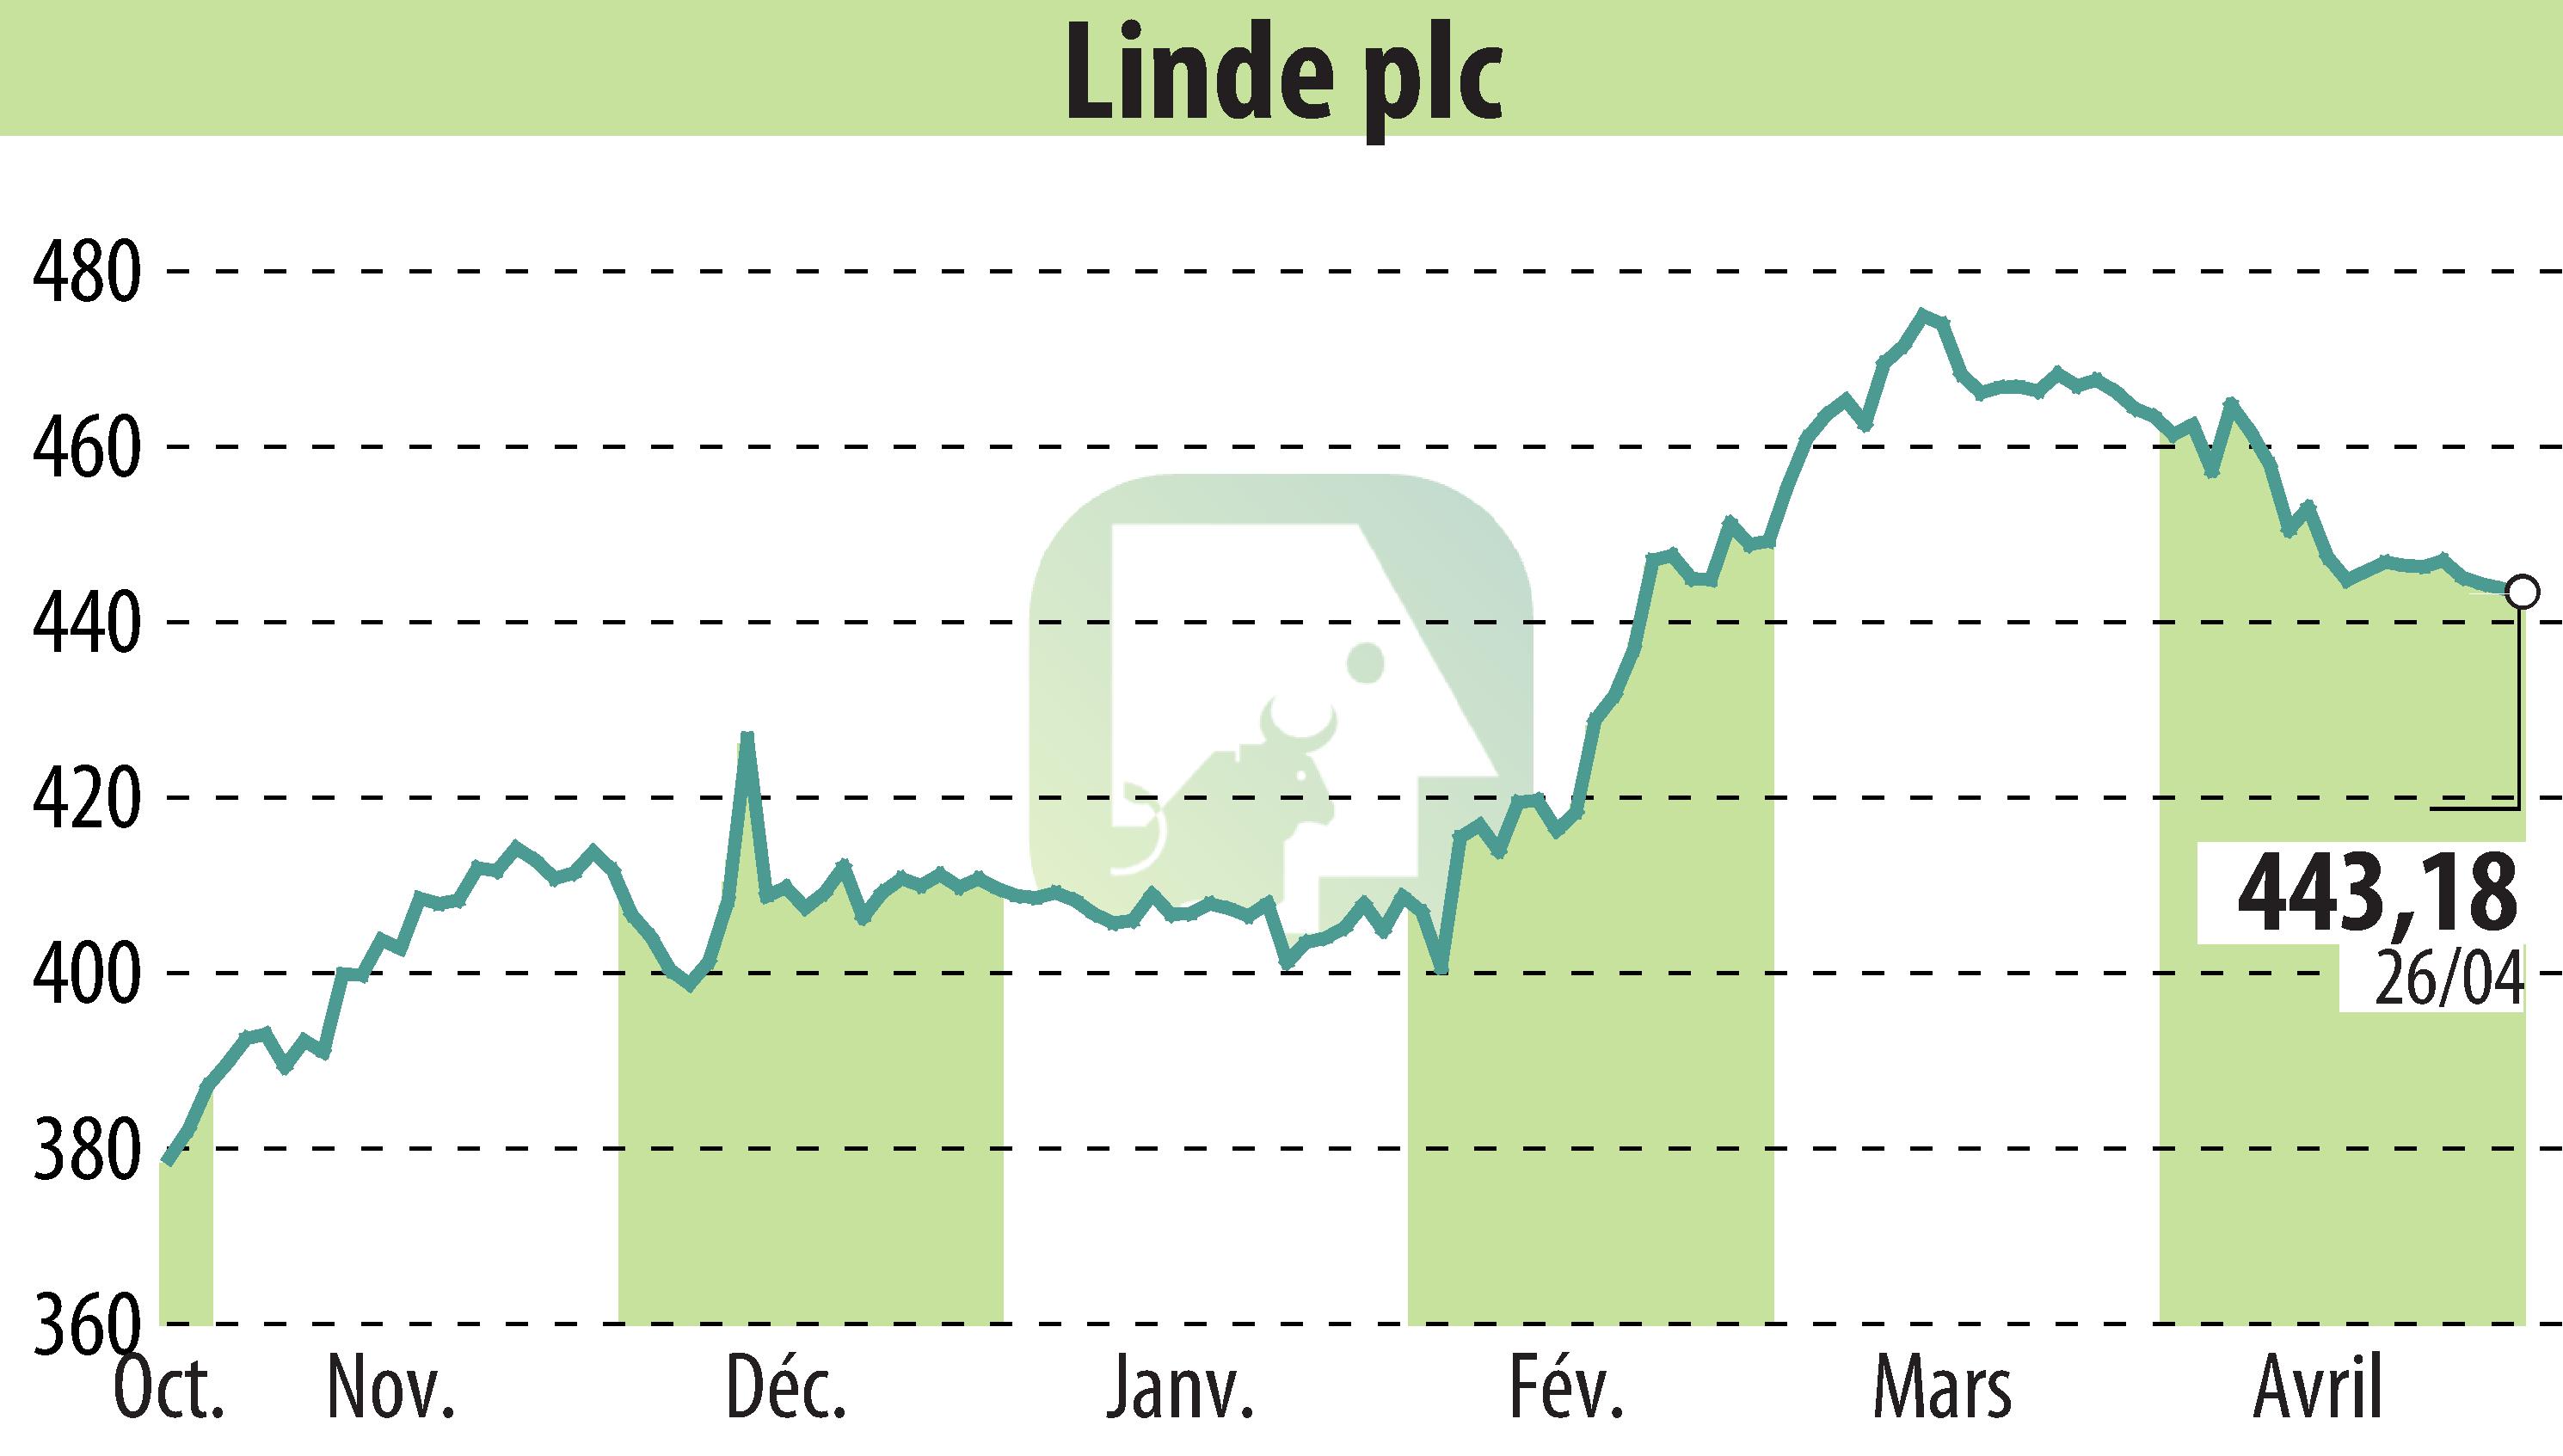 Stock price chart of Linde Plc (EBR:LIN) showing fluctuations.